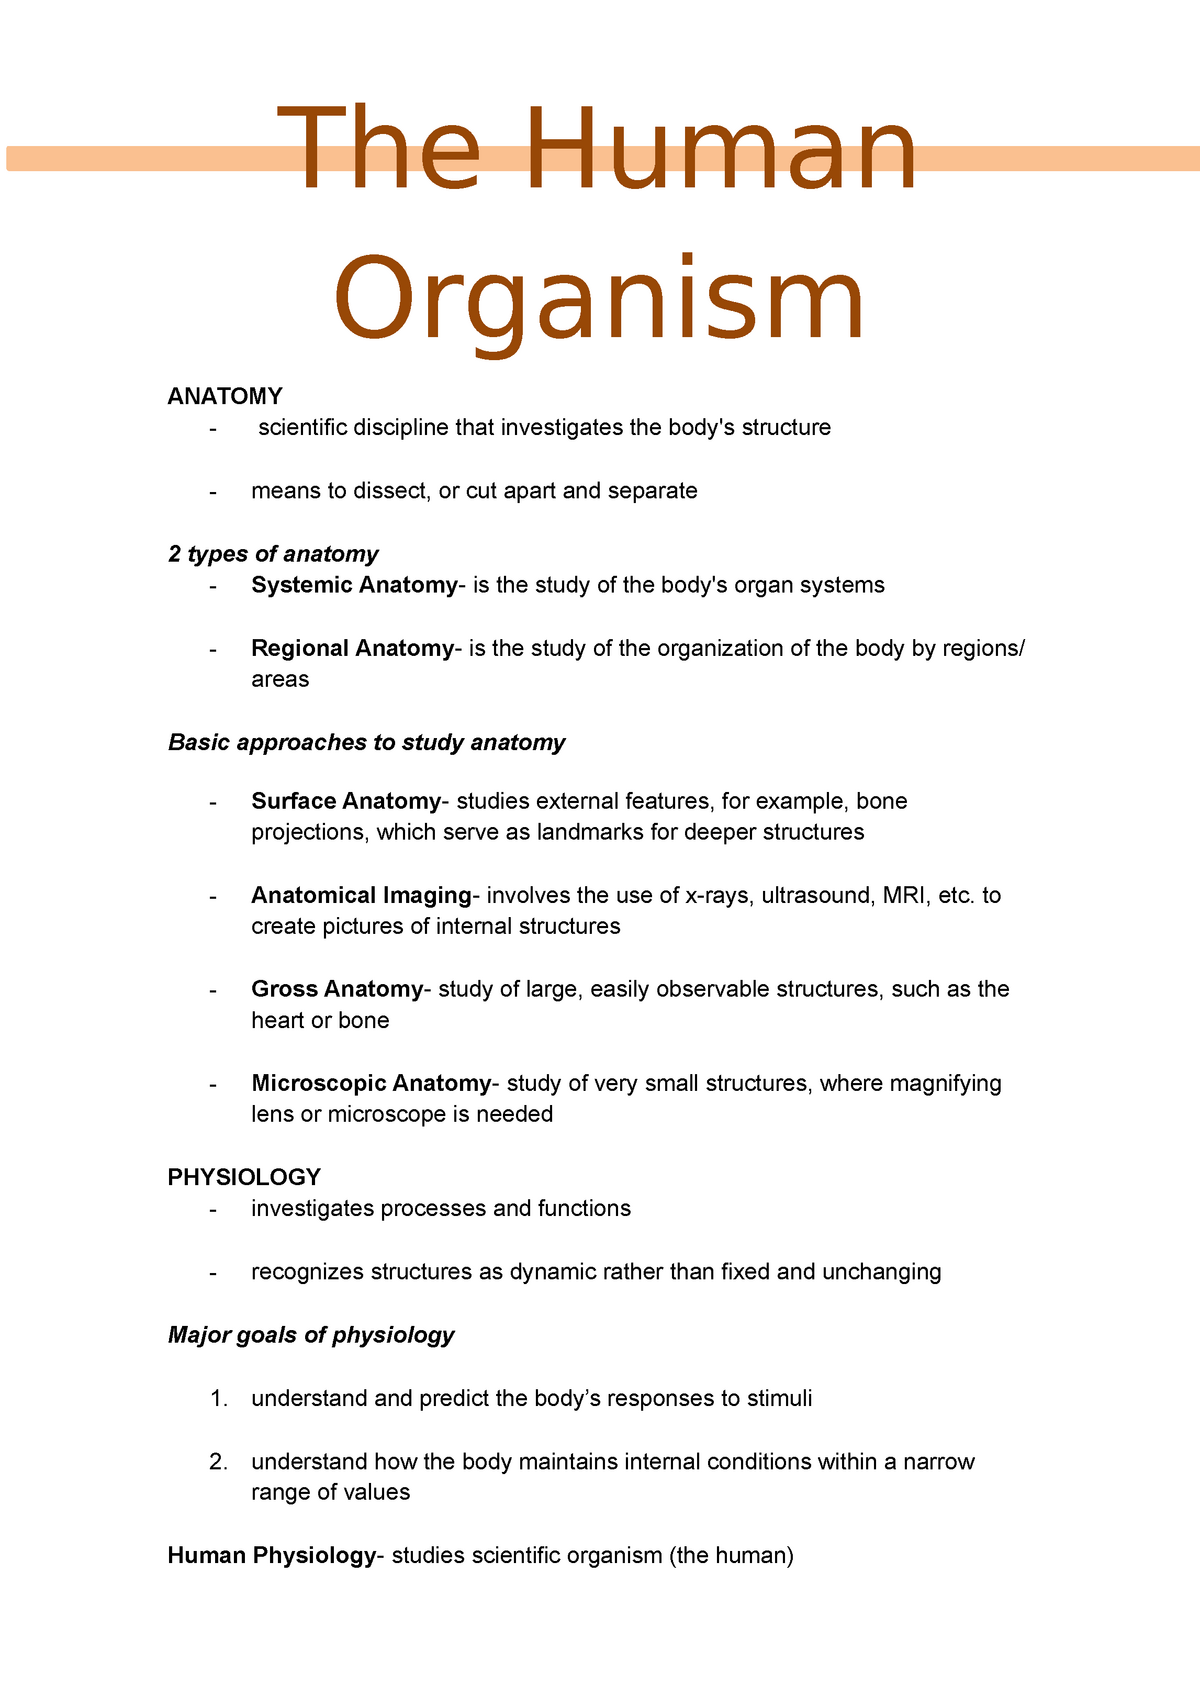 Notes Chapter 1 Human Organism The Human Organism Anatomy Scientific Discipline That 6980